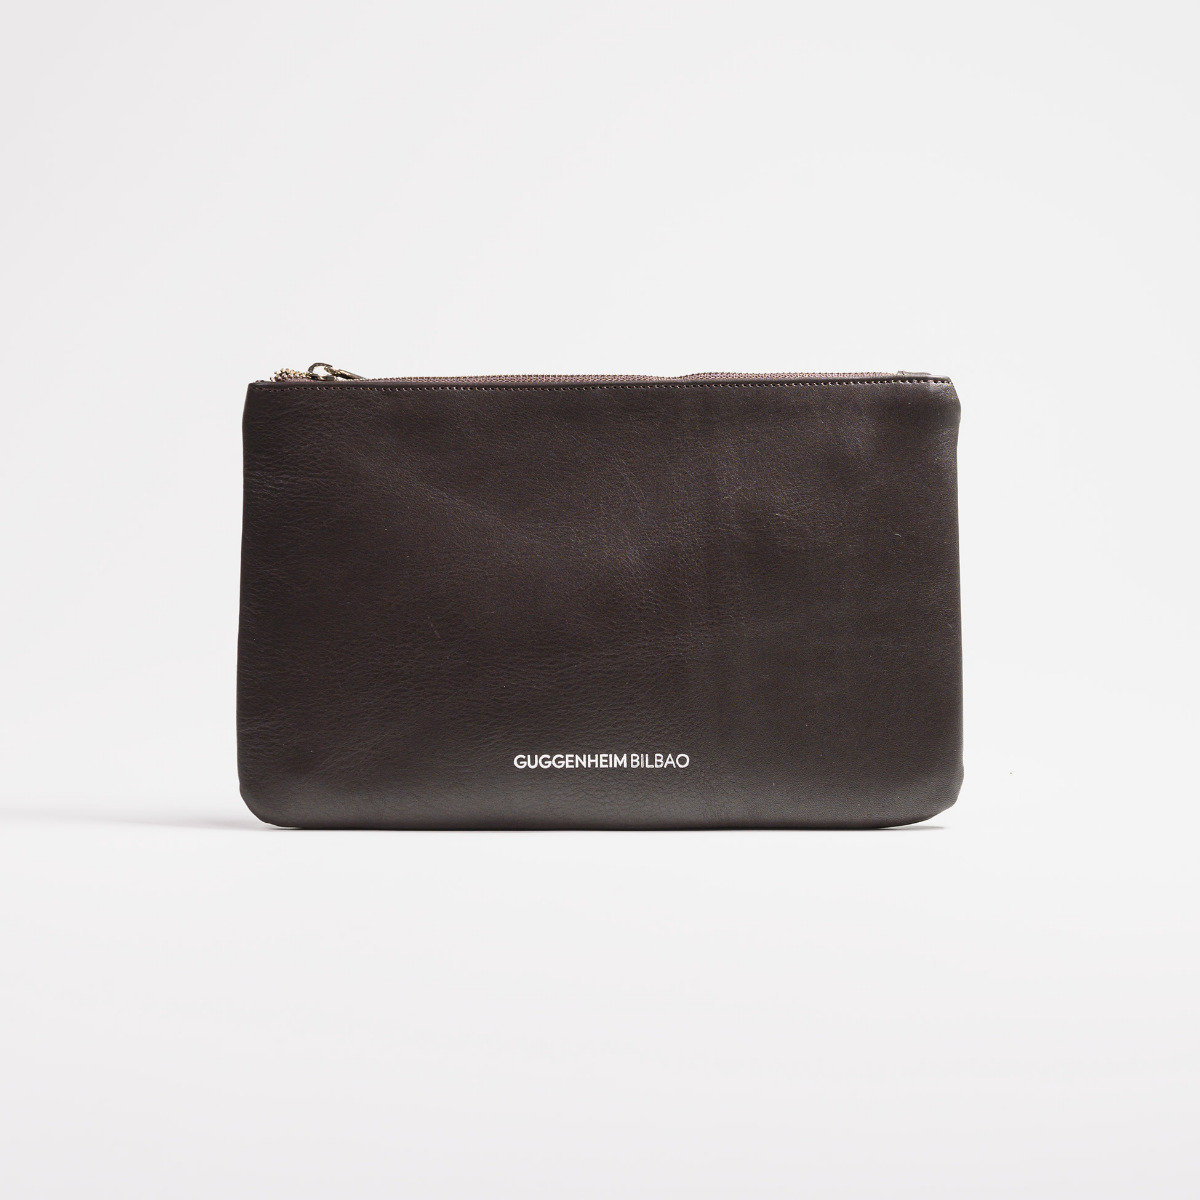 MEDIUM LEATHER POUCH